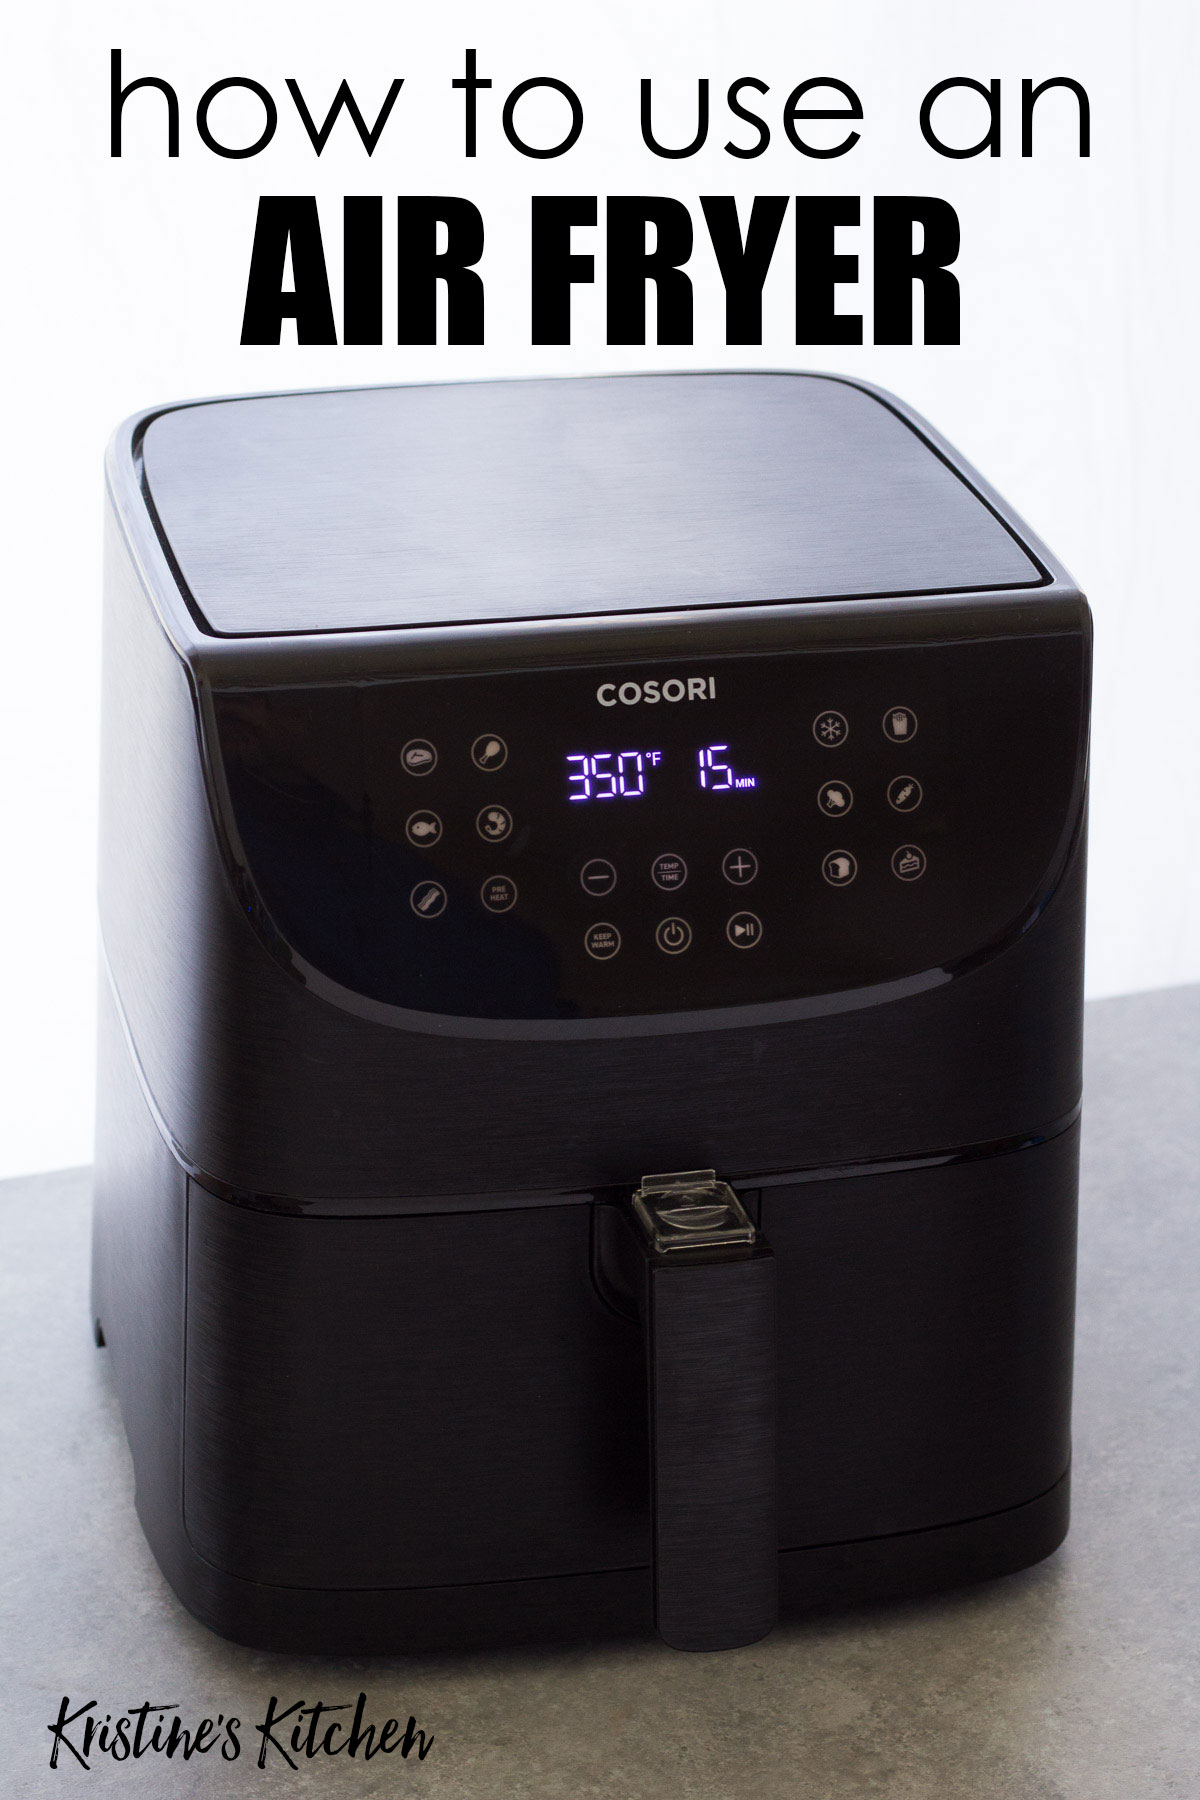 https://kristineskitchenblog.com/wp-content/uploads/2021/12/how-to-use-an-air-fryer-text-overlay.jpg